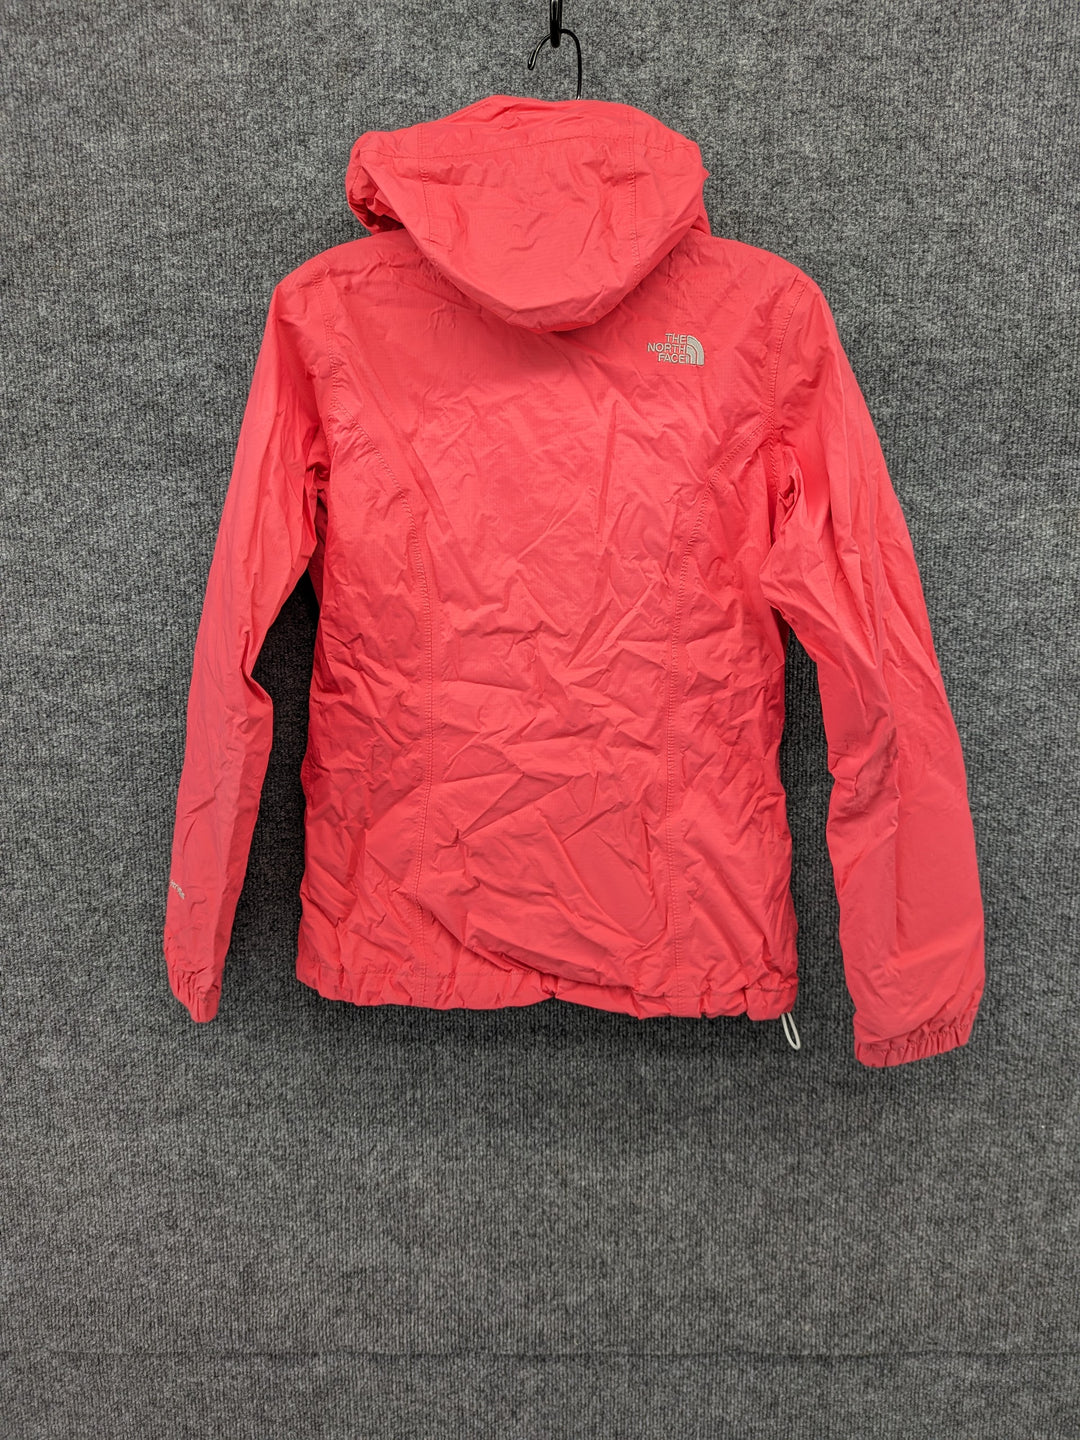 The North Face Size W Small Women's Rain Jacket